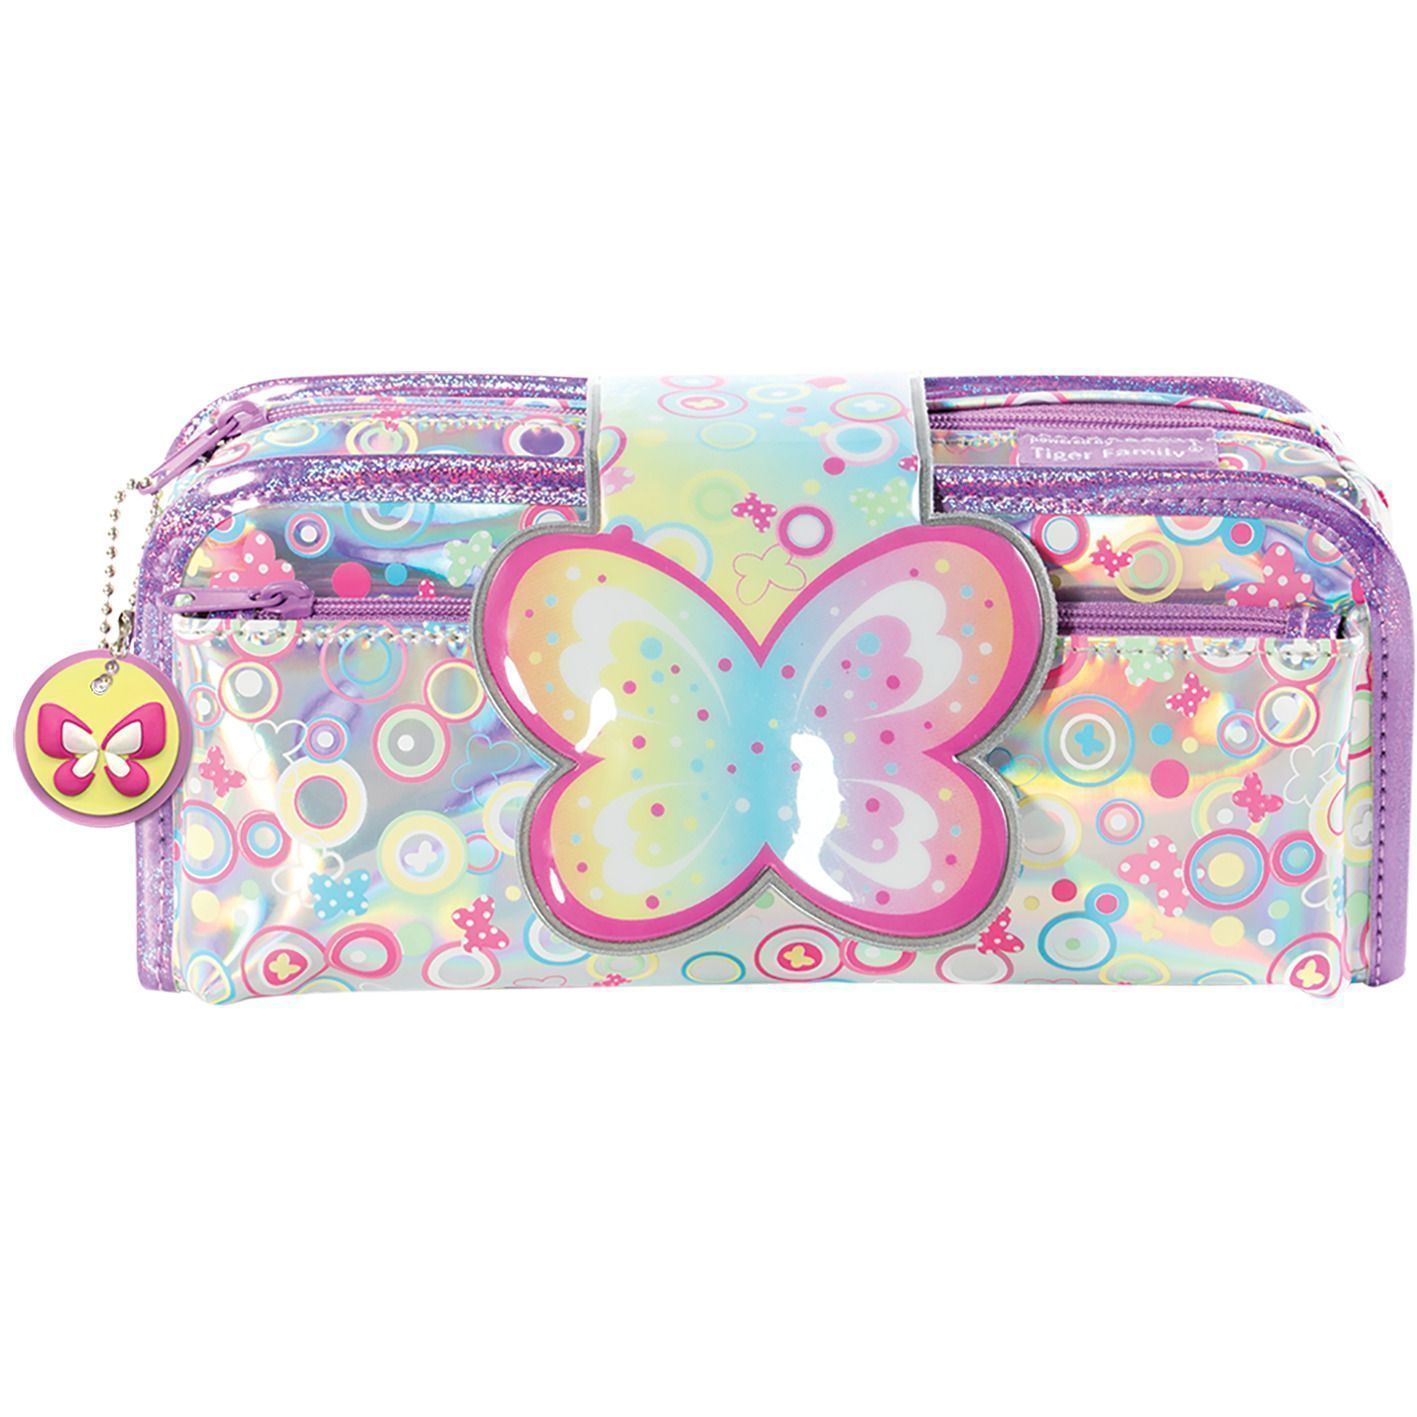  2  1 TIGER FUN TIME SPARKLING BUTTERFLY 11228   